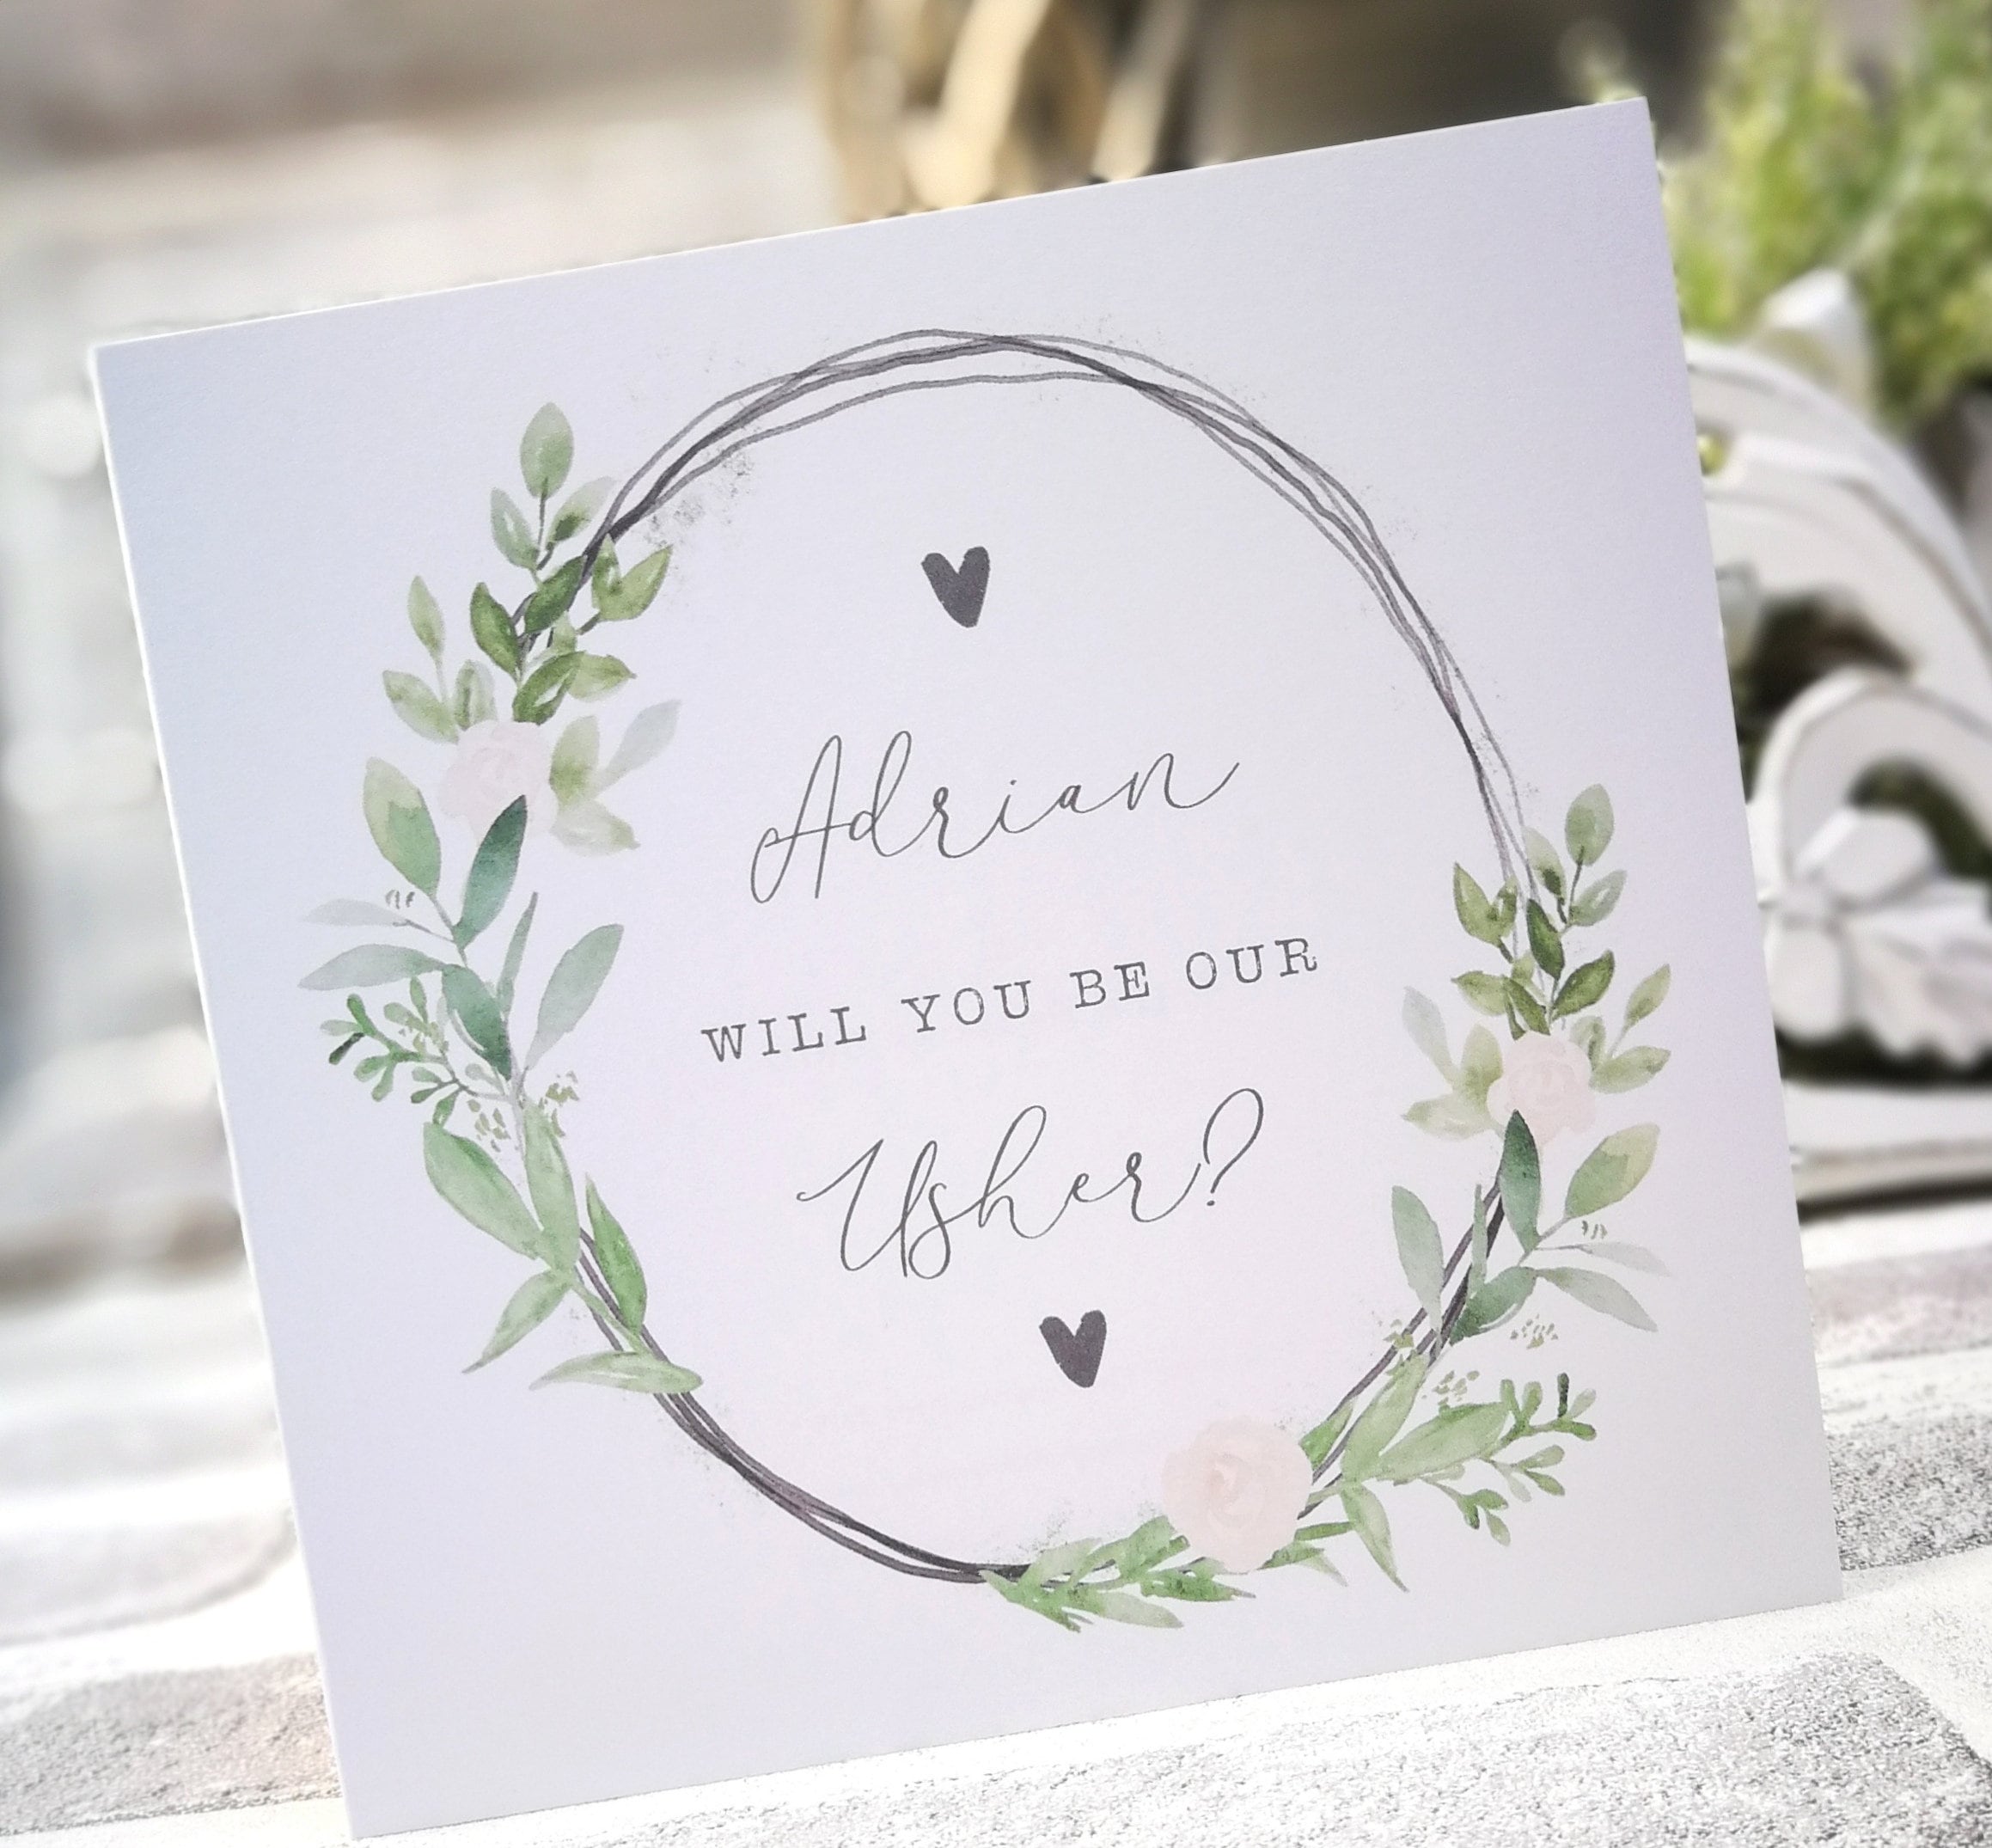 Personalised Will You Be Our Usher/Greeter Wedding Card. Rustic, Greenery, Botanical, Country Floral